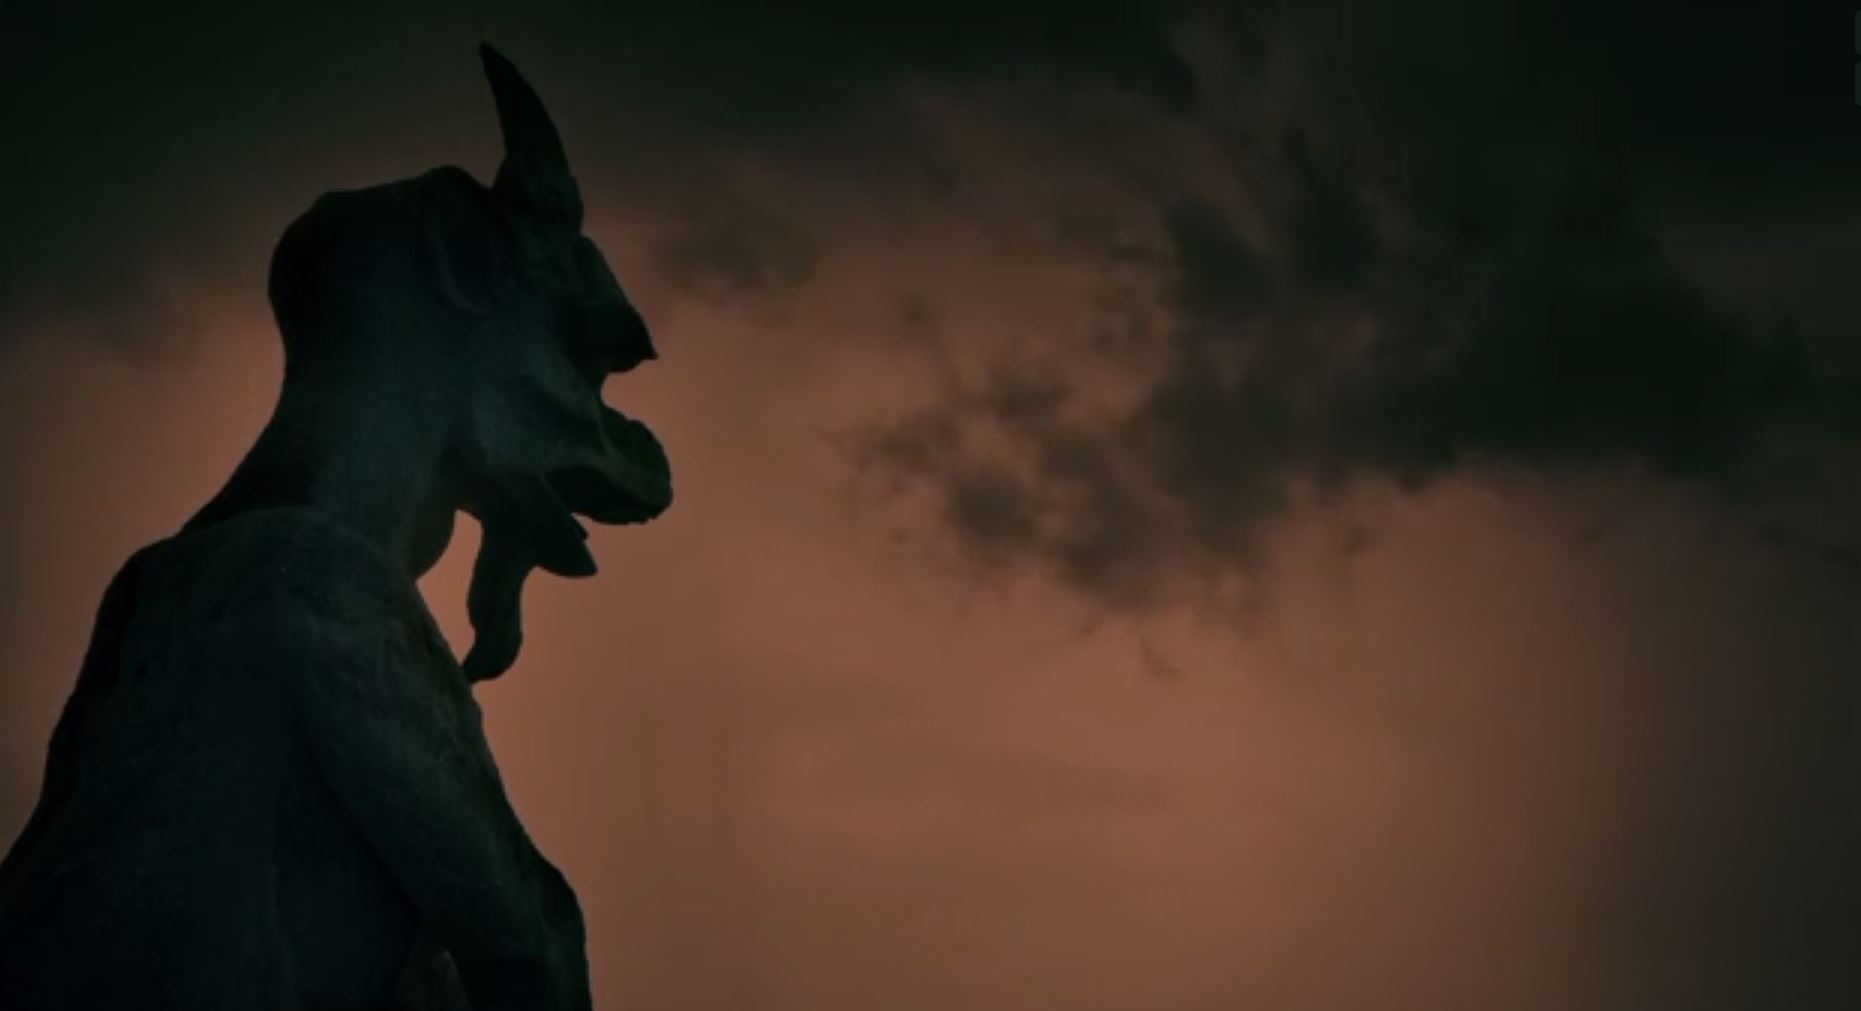 Science Channel's 'Mythical Beasts' sheds light on demon origins